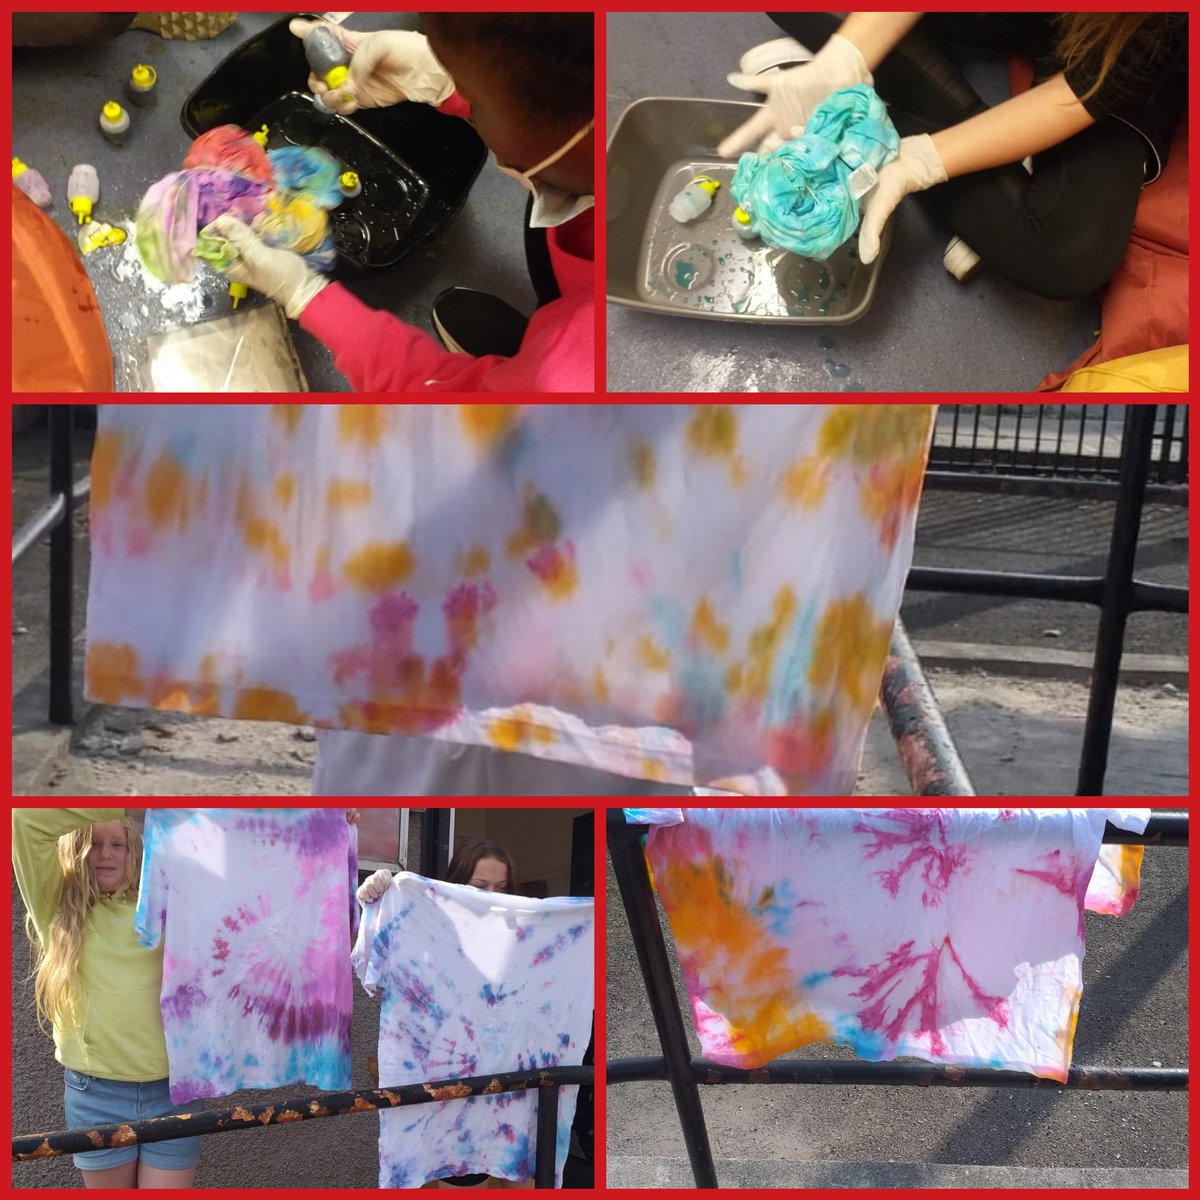 Thanks to one of our amazing @AberlourCCT young people who led a tie dye workshop that our #youthpoint young people took part in. T-shirts are out drying in the ☀️☀️☀️